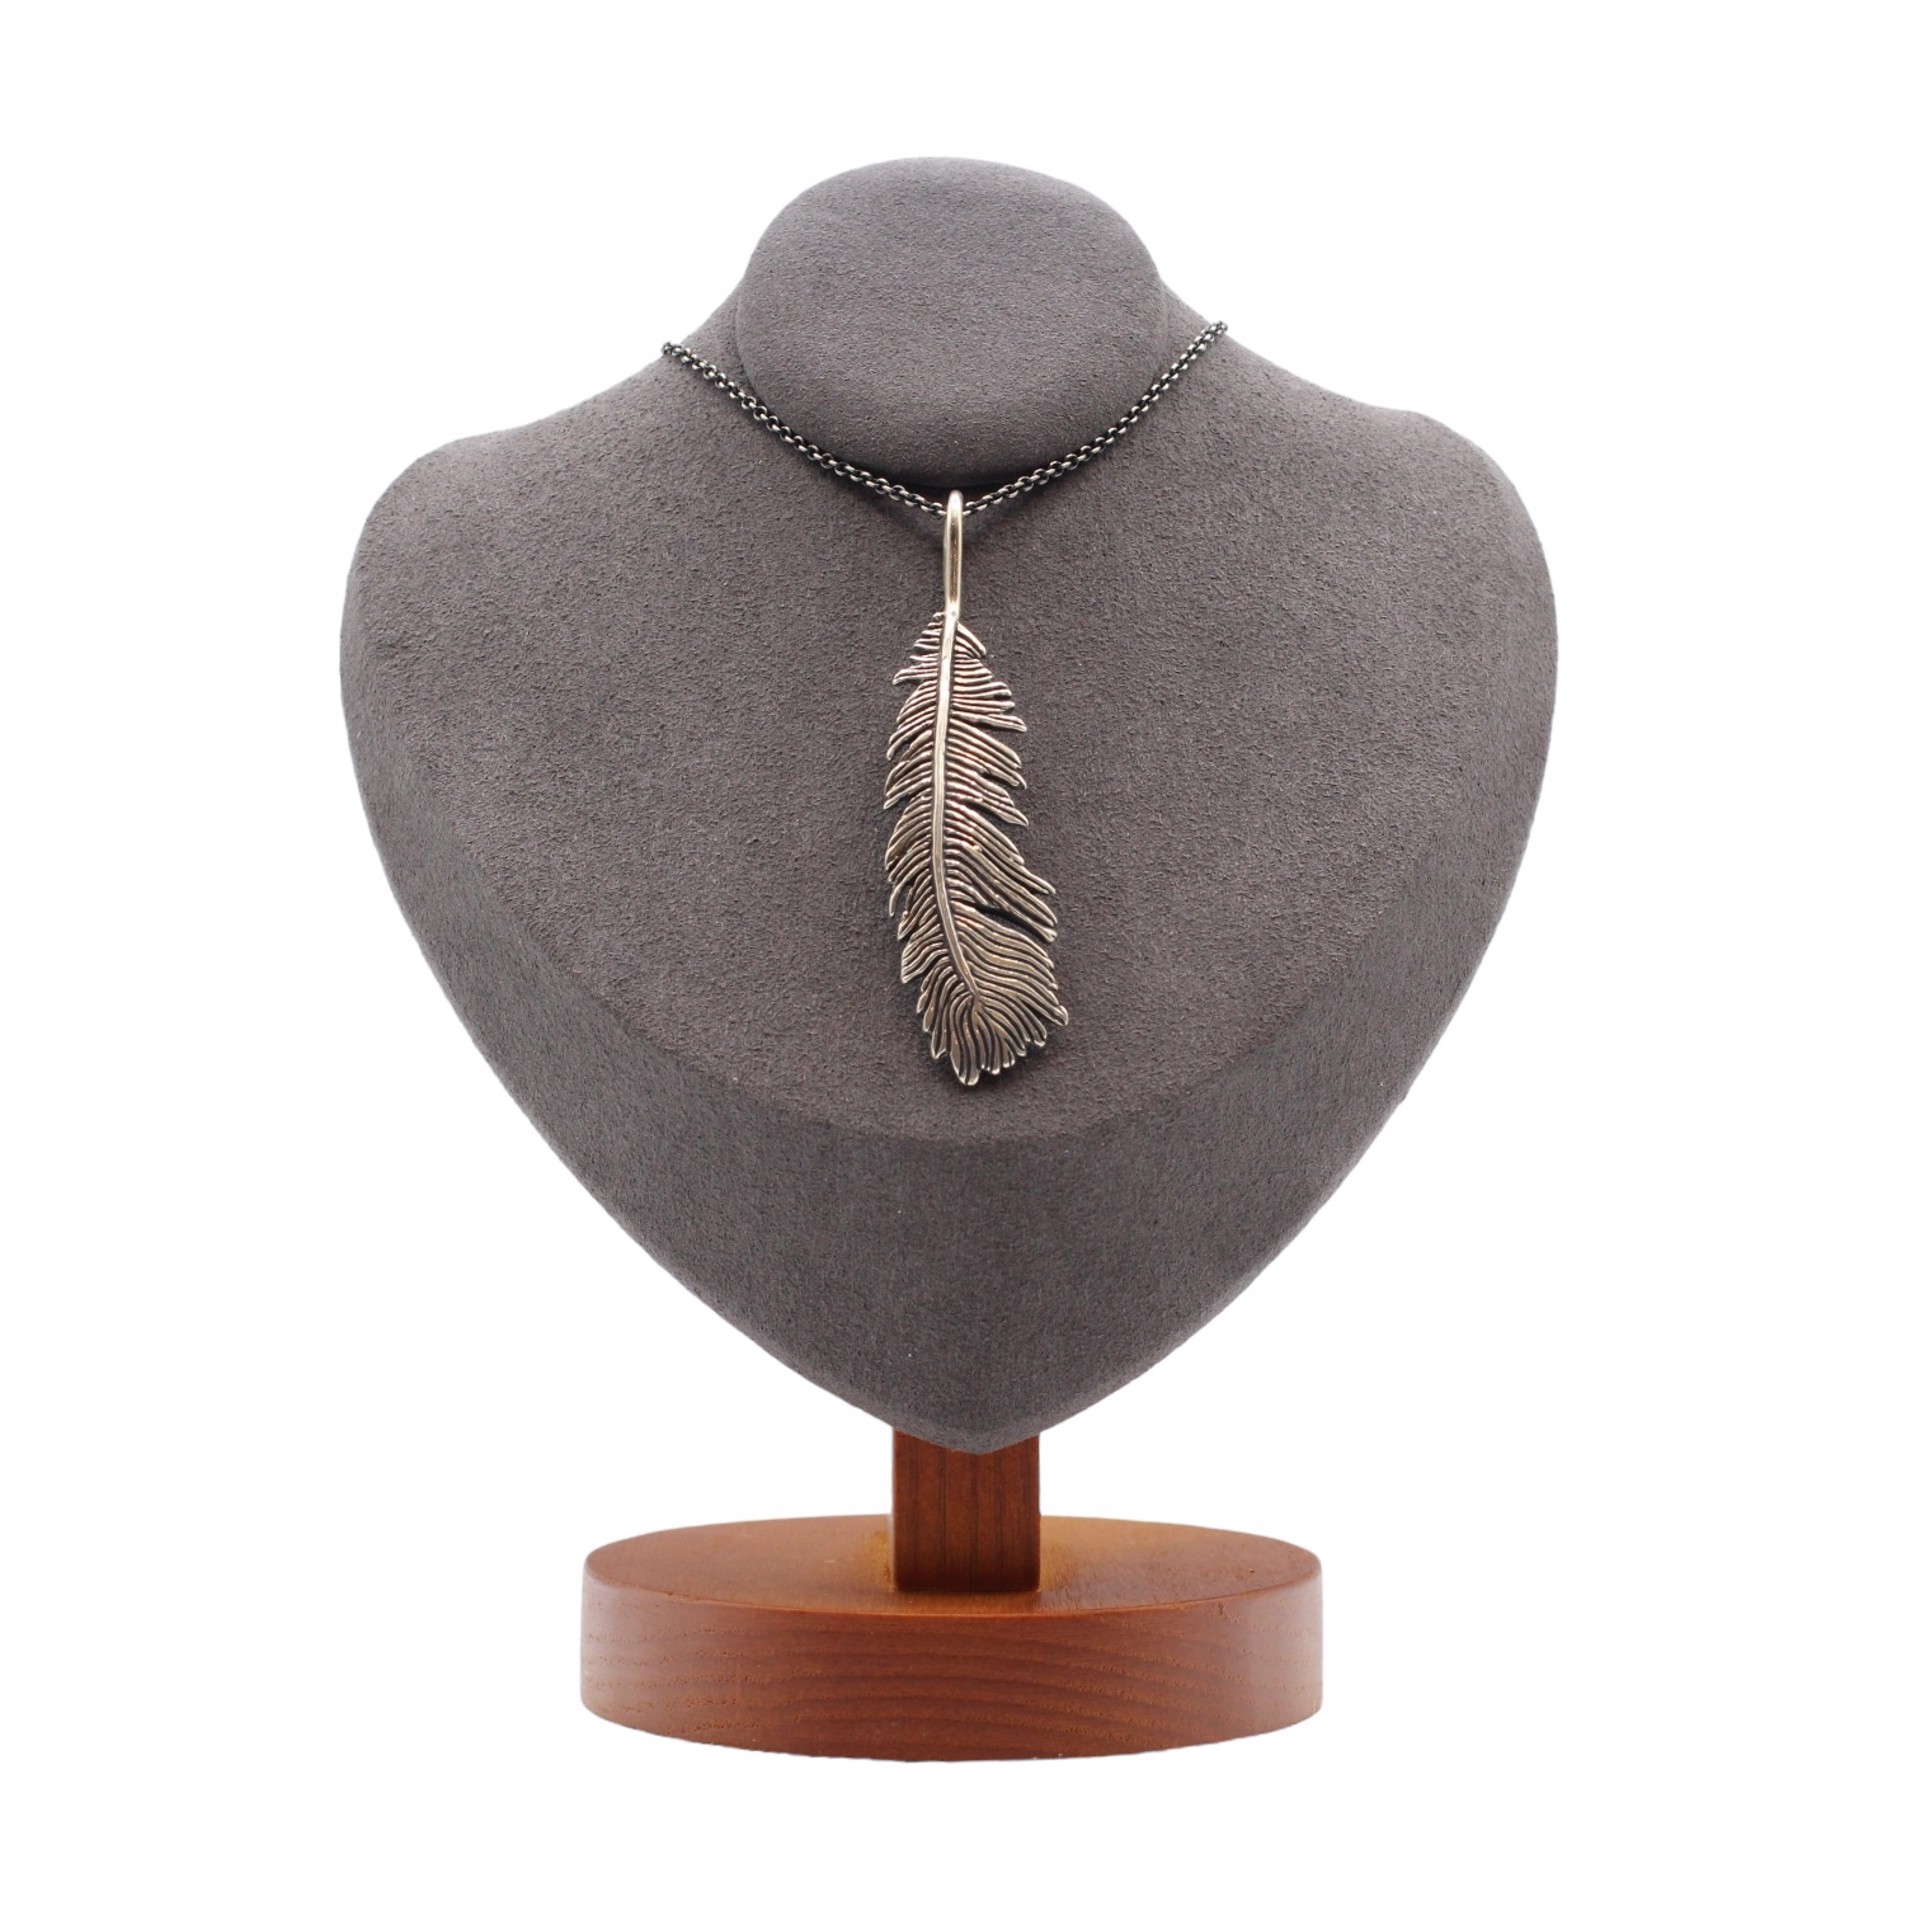 Silver Feather Necklace by Louisa Berky